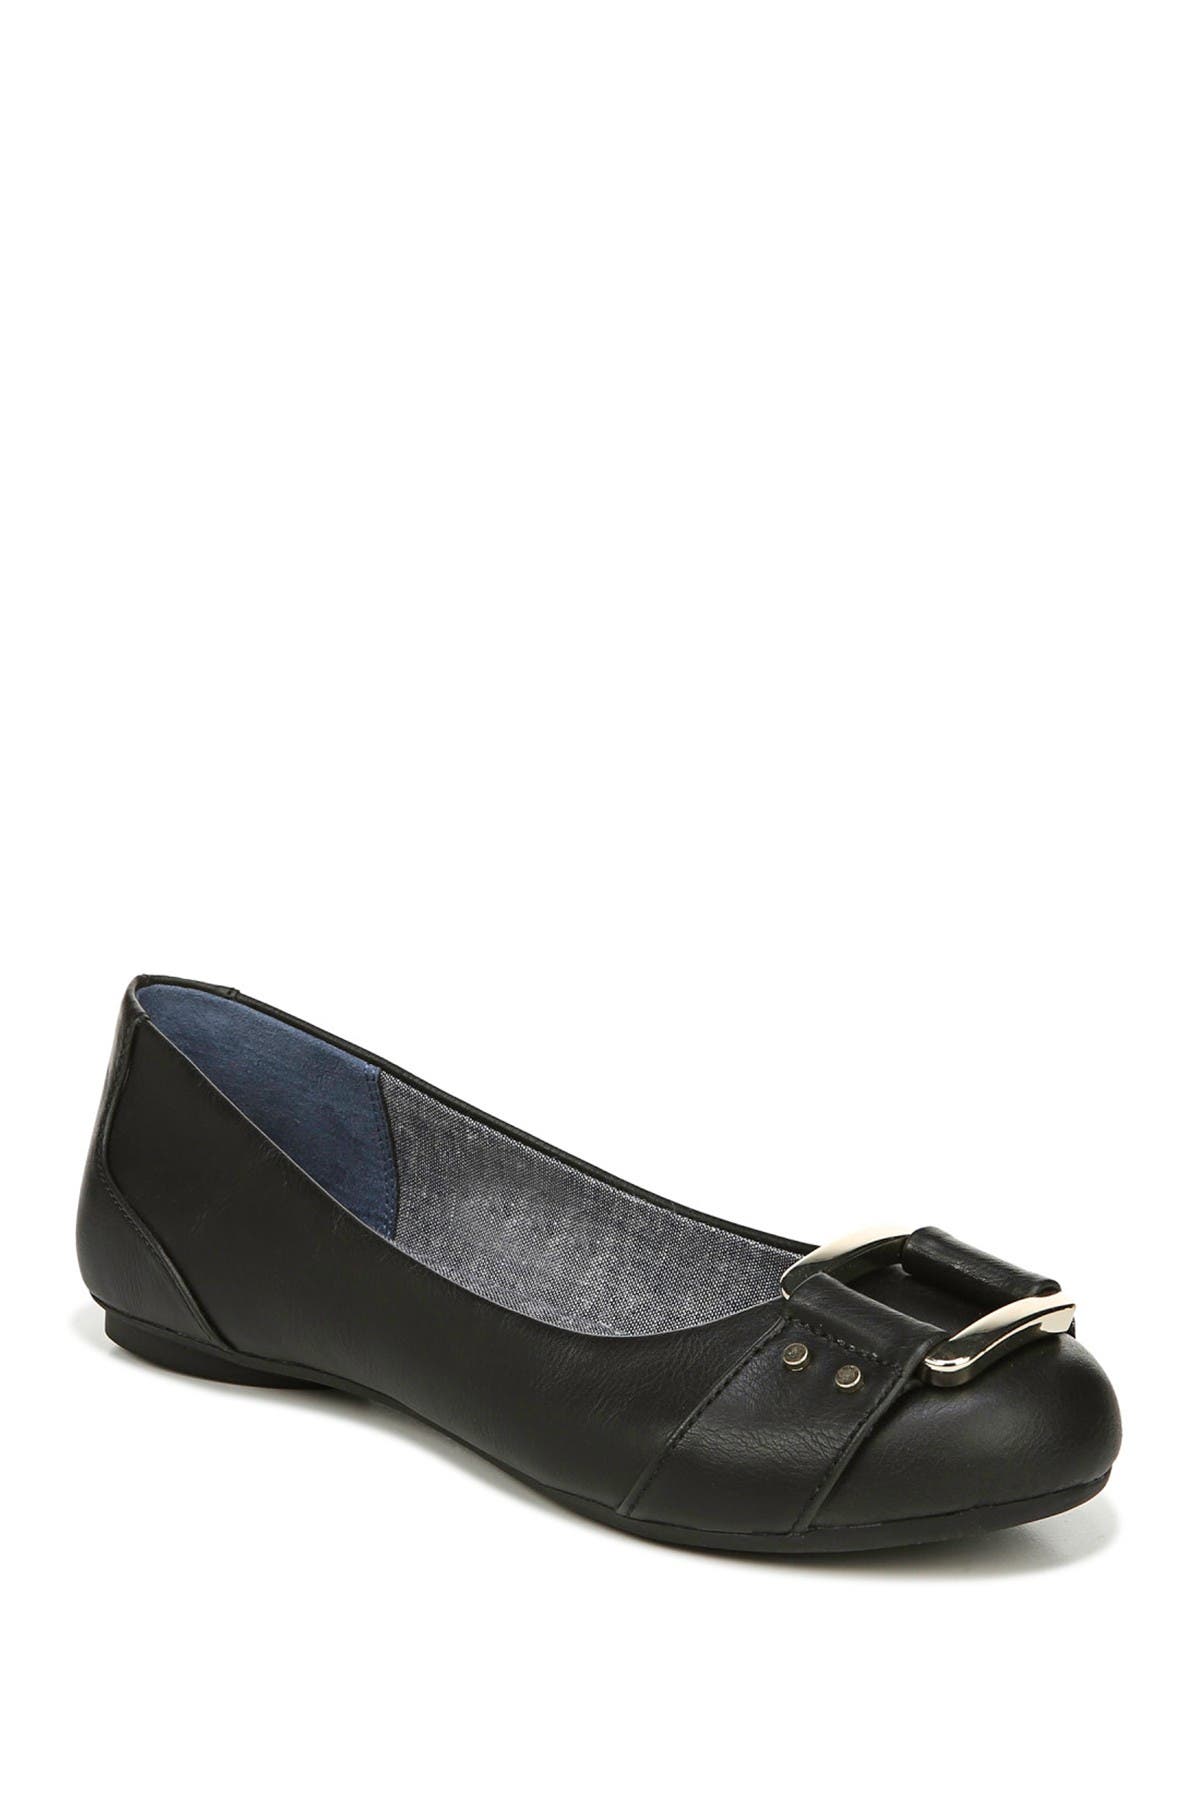 Dr. Scholl's Frankie Buckle Flat In Oxford6